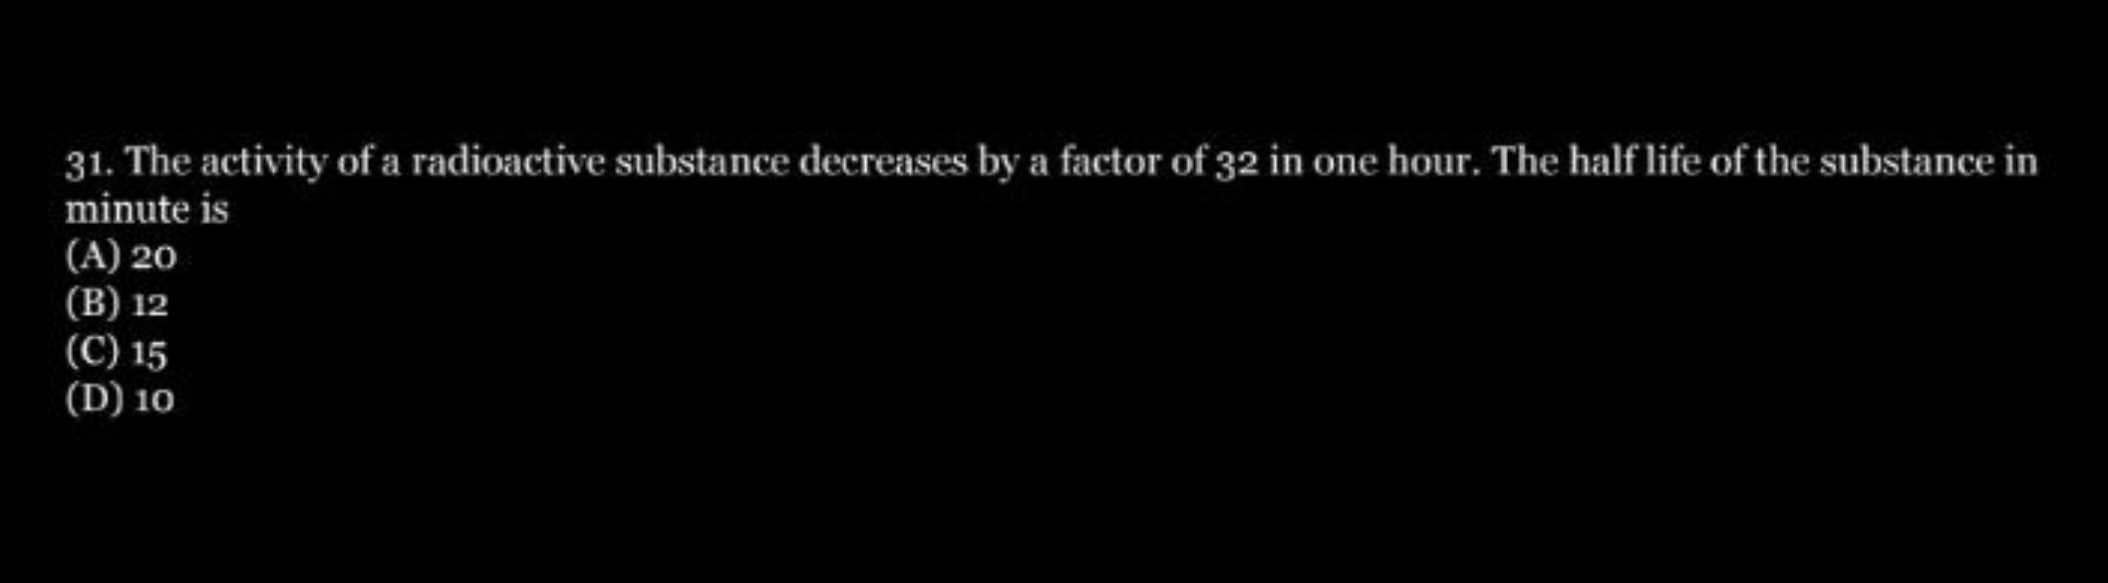 The activity of a radioactive substance decreases by a factor of 32 in